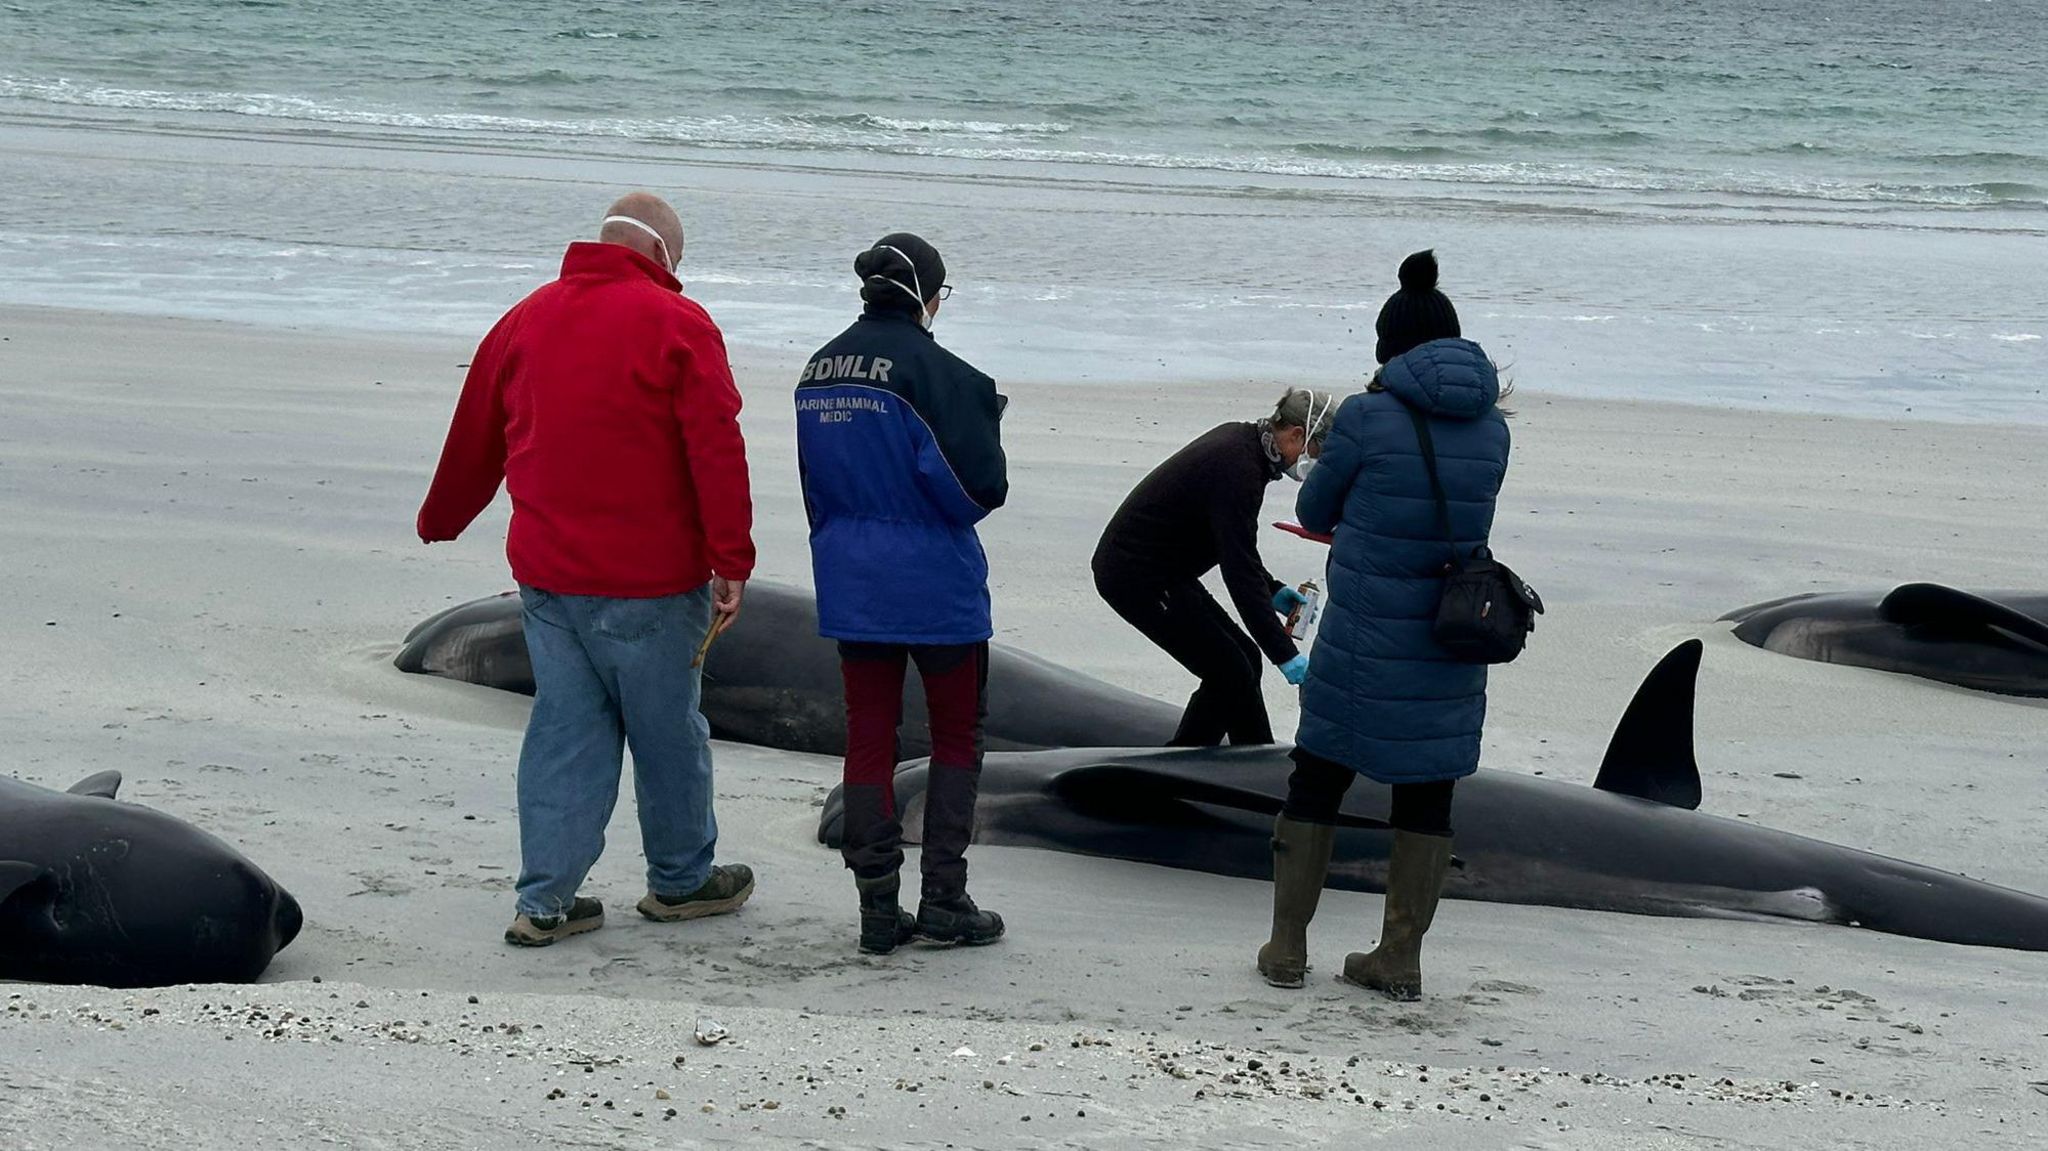 Experts are at the beach to assess what can be done for the whales